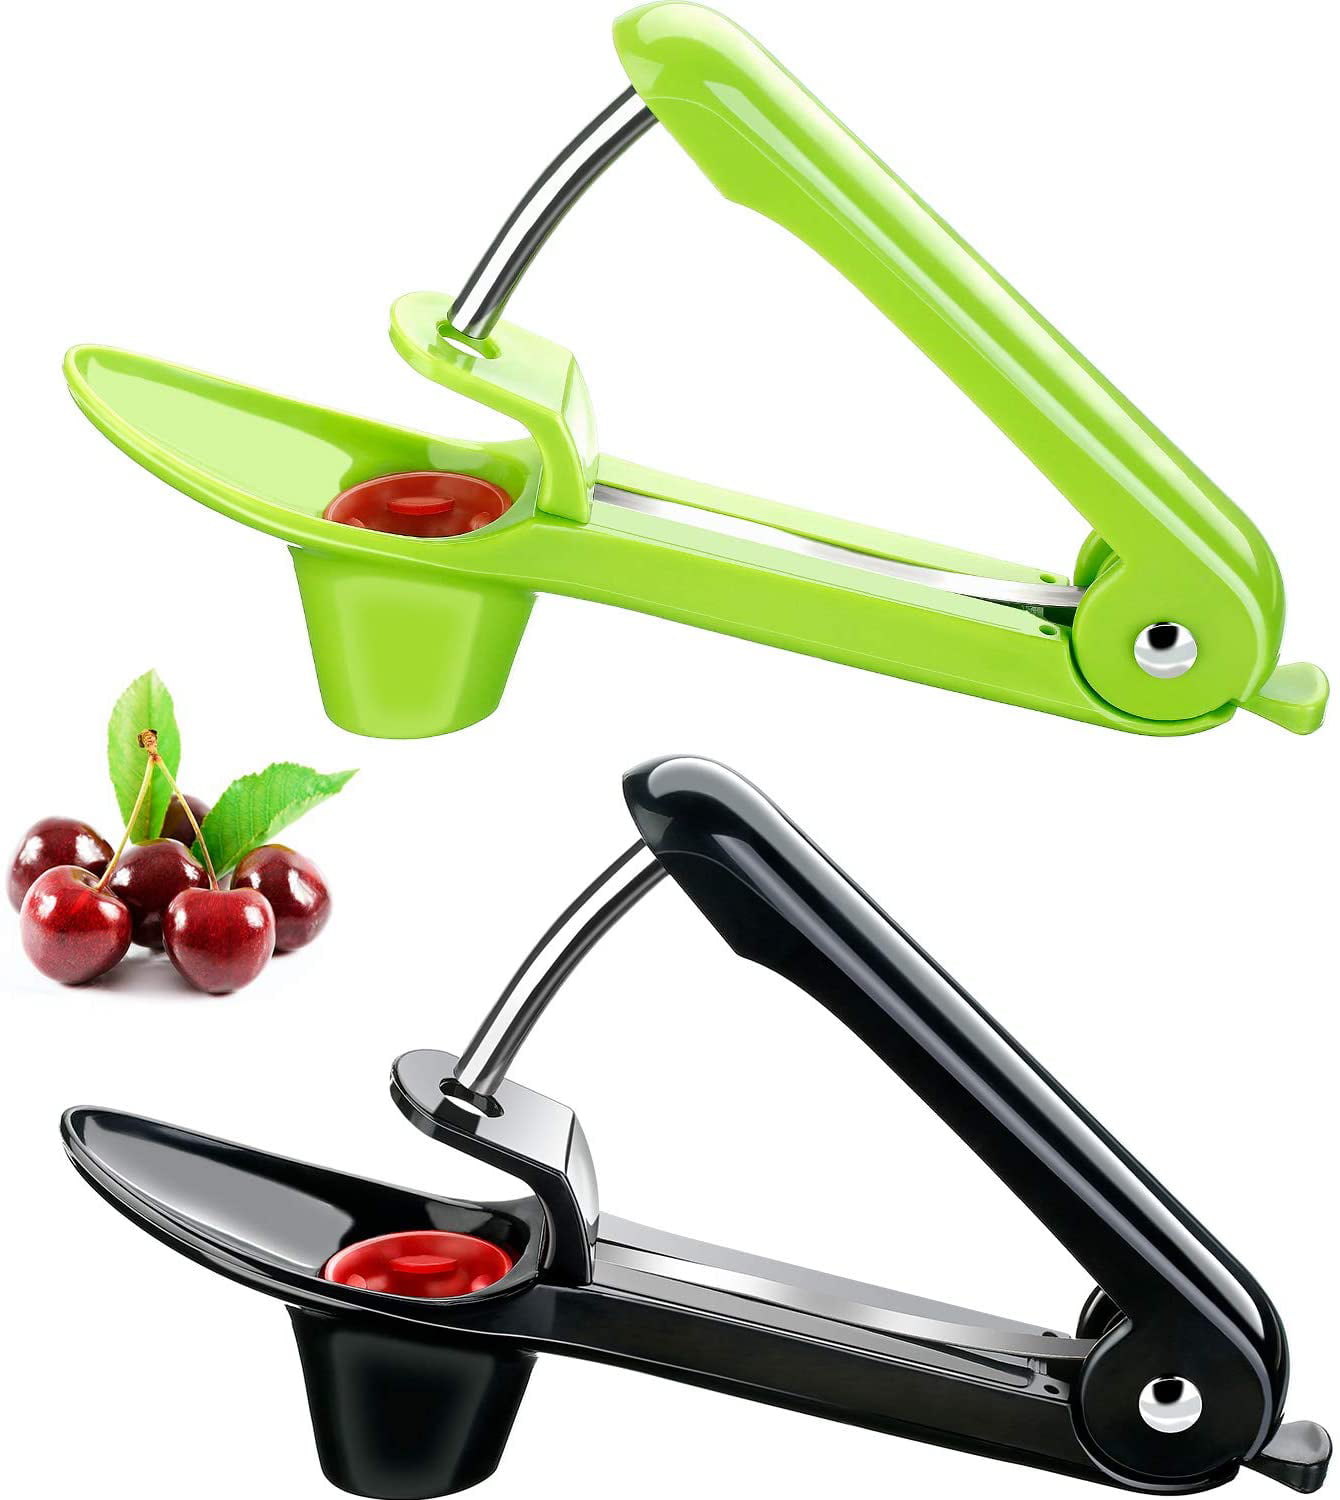 Black Westmark Westmark Cherry Pitter/Stoner Gets Rid Of The Pit And The Stem At The Same Time 